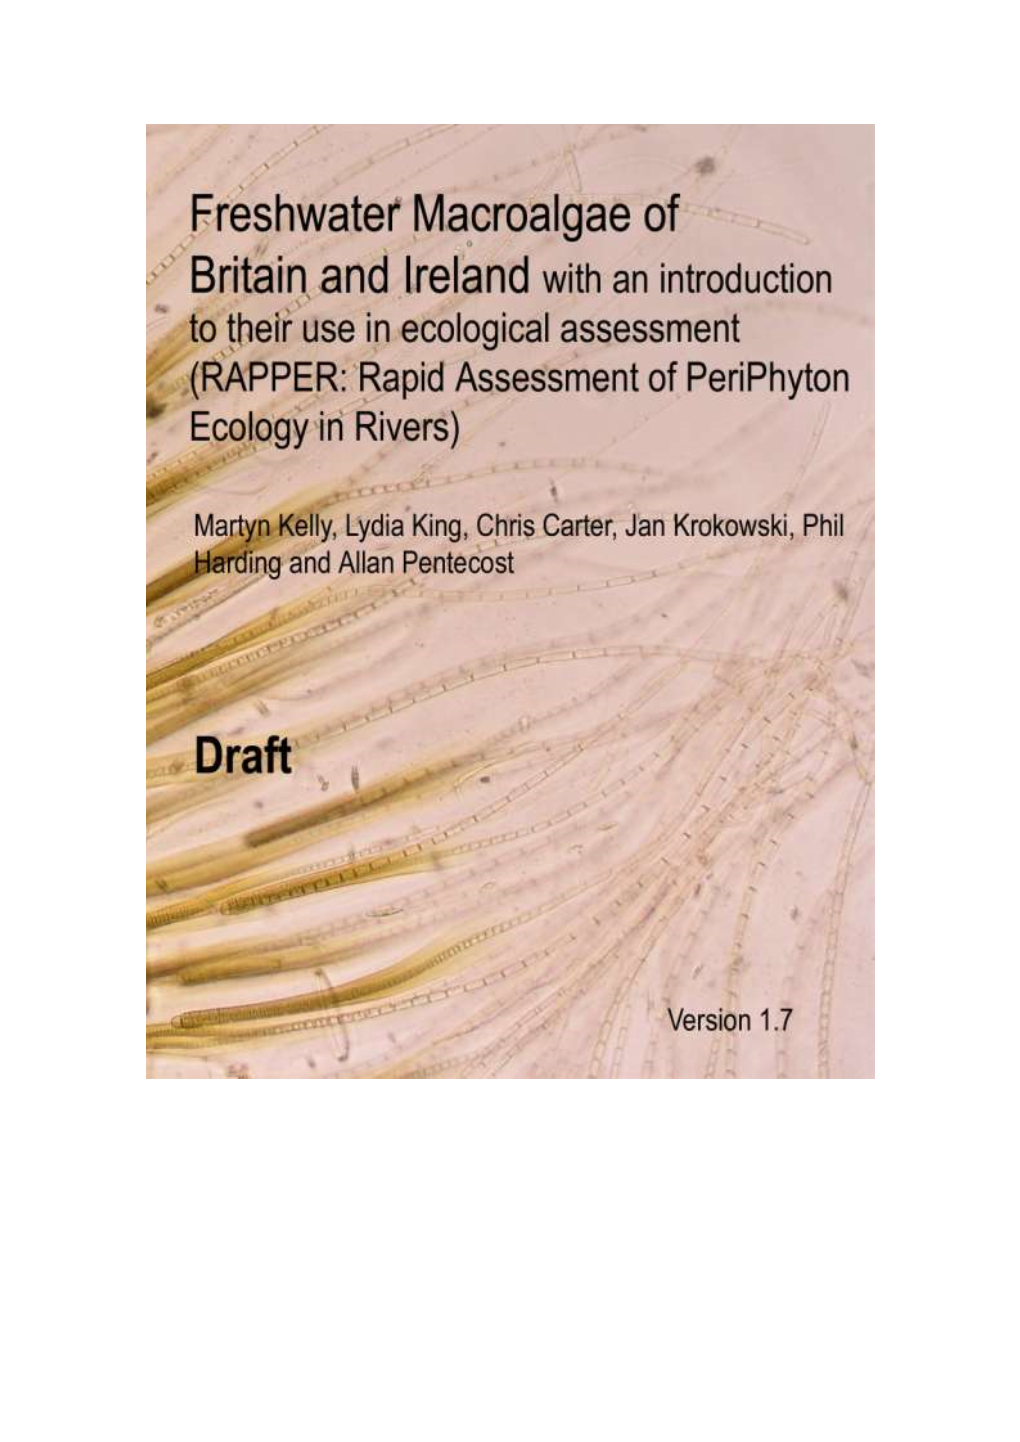 Freshwater Macroalgae of Britain and Ireland with an Introduction to Their Use in Ecological Assessment (RAPPER: Rapid Assessment of Periphyton Ecology in Rivers)